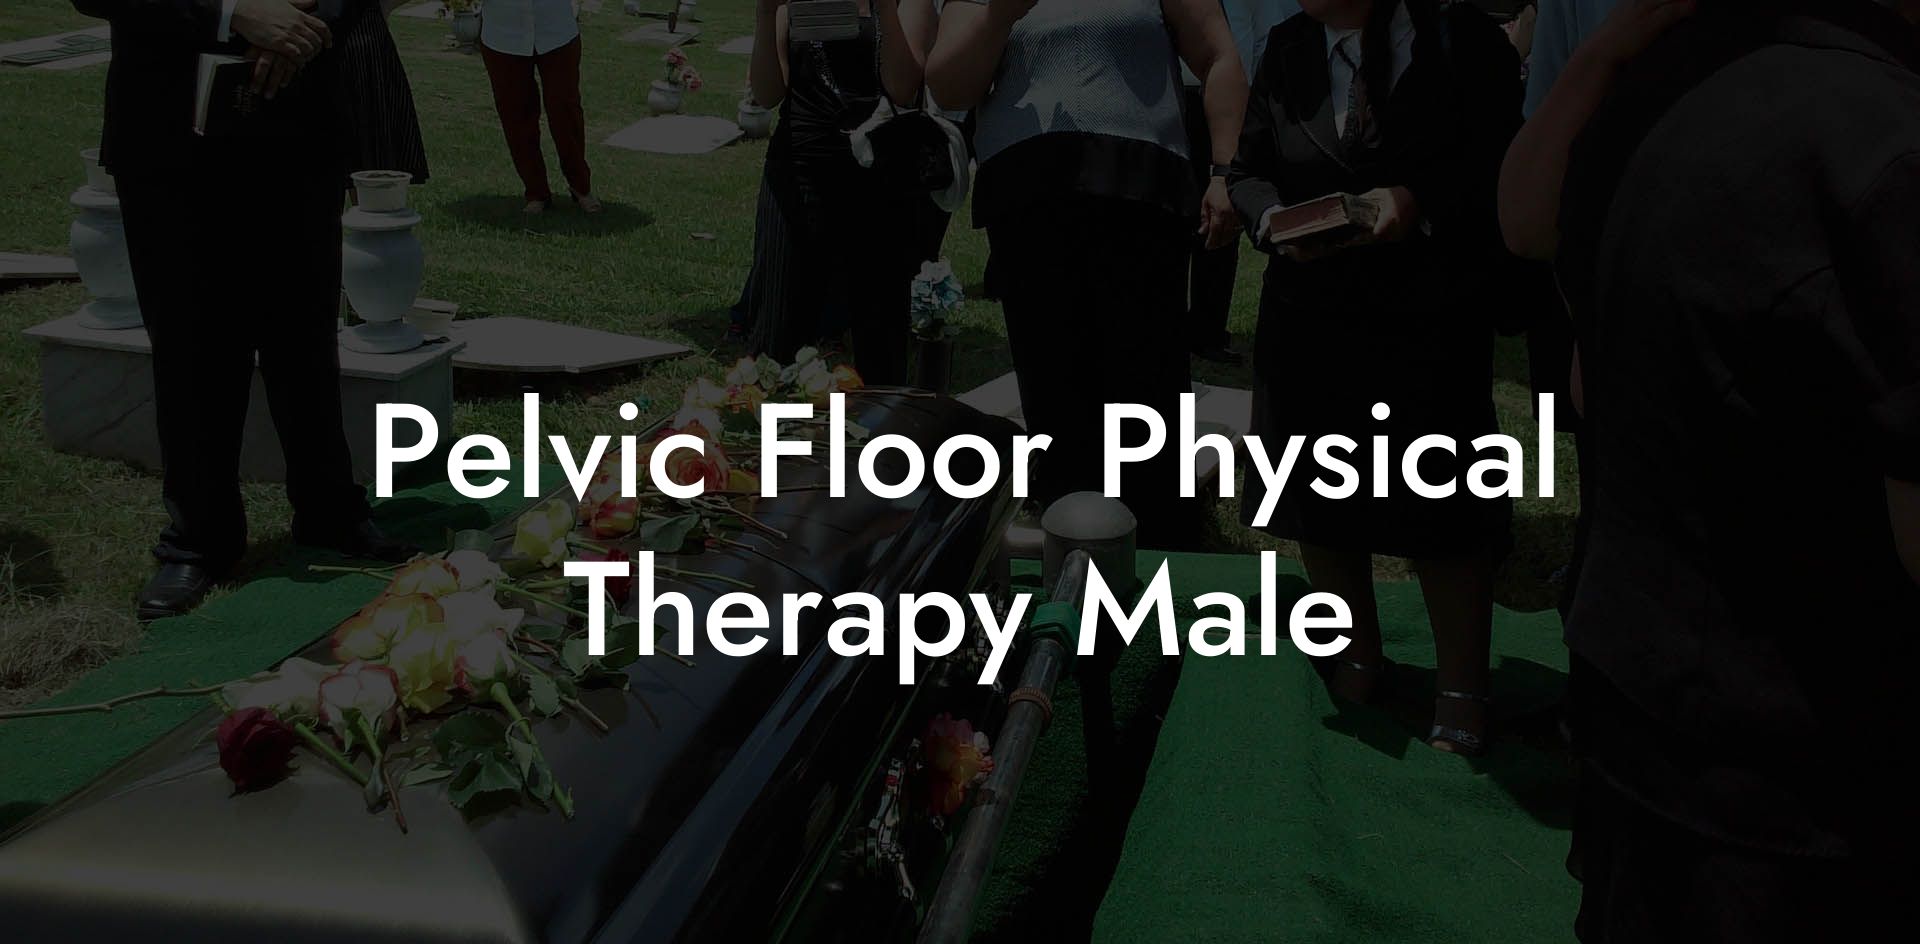 Pelvic Floor Physical Therapy Male